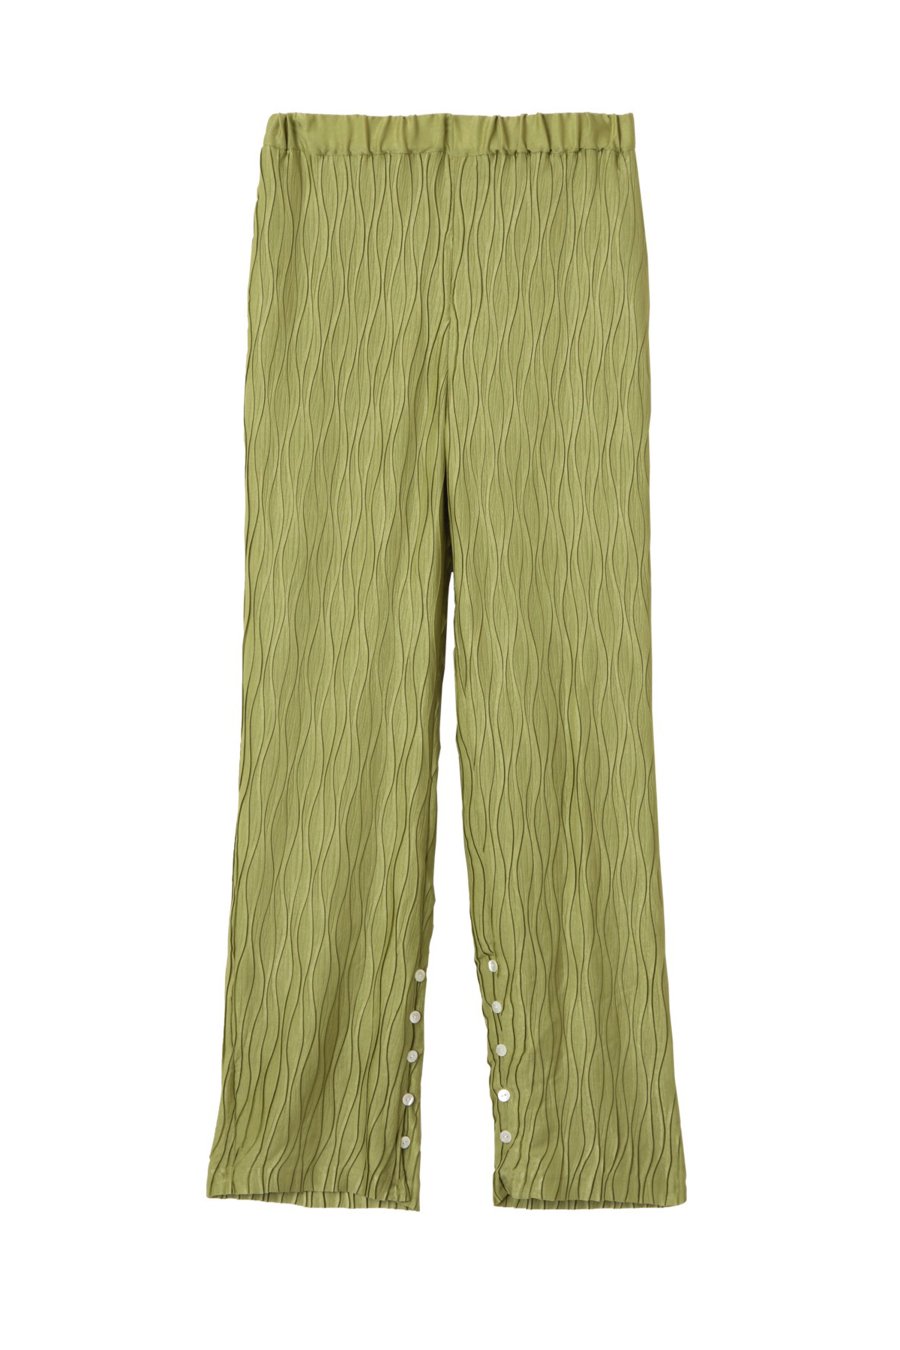 BELPER  PLEATED PANTS（GREEN）<img class='new_mark_img2' src='https://img.shop-pro.jp/img/new/icons15.gif' style='border:none;display:inline;margin:0px;padding:0px;width:auto;' />